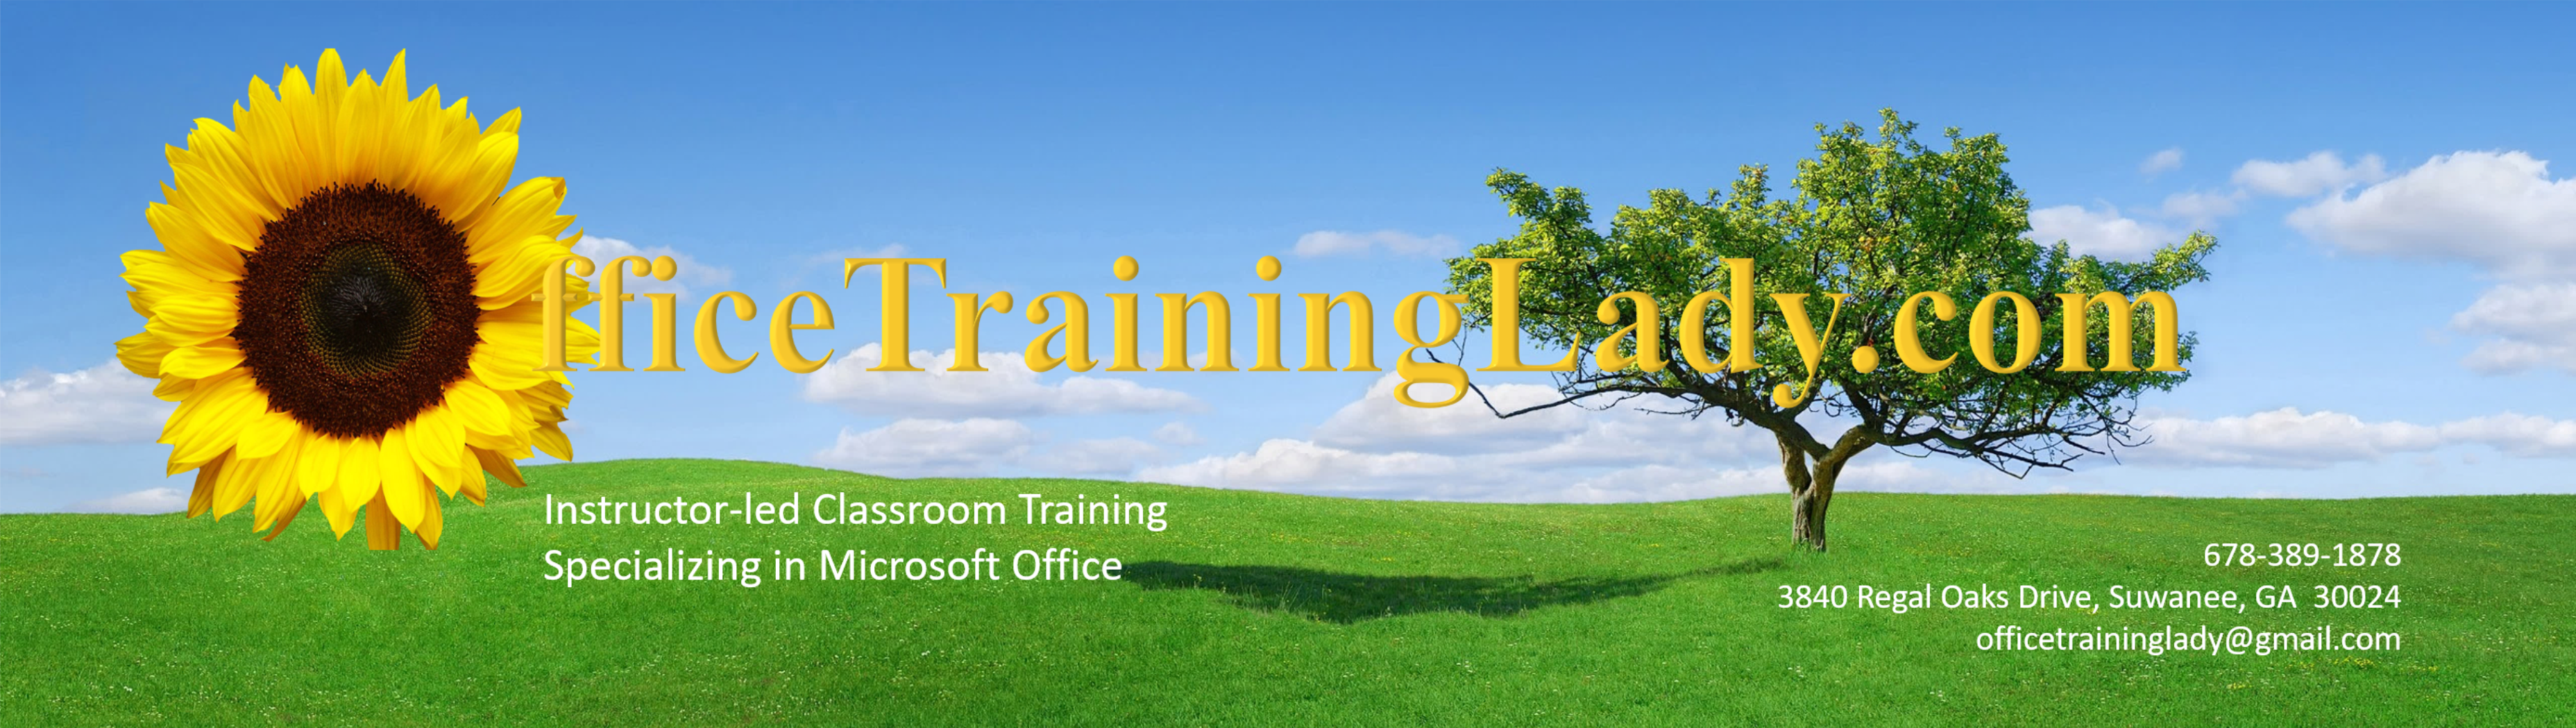 Microsoft Office Instructor-led Training and Support